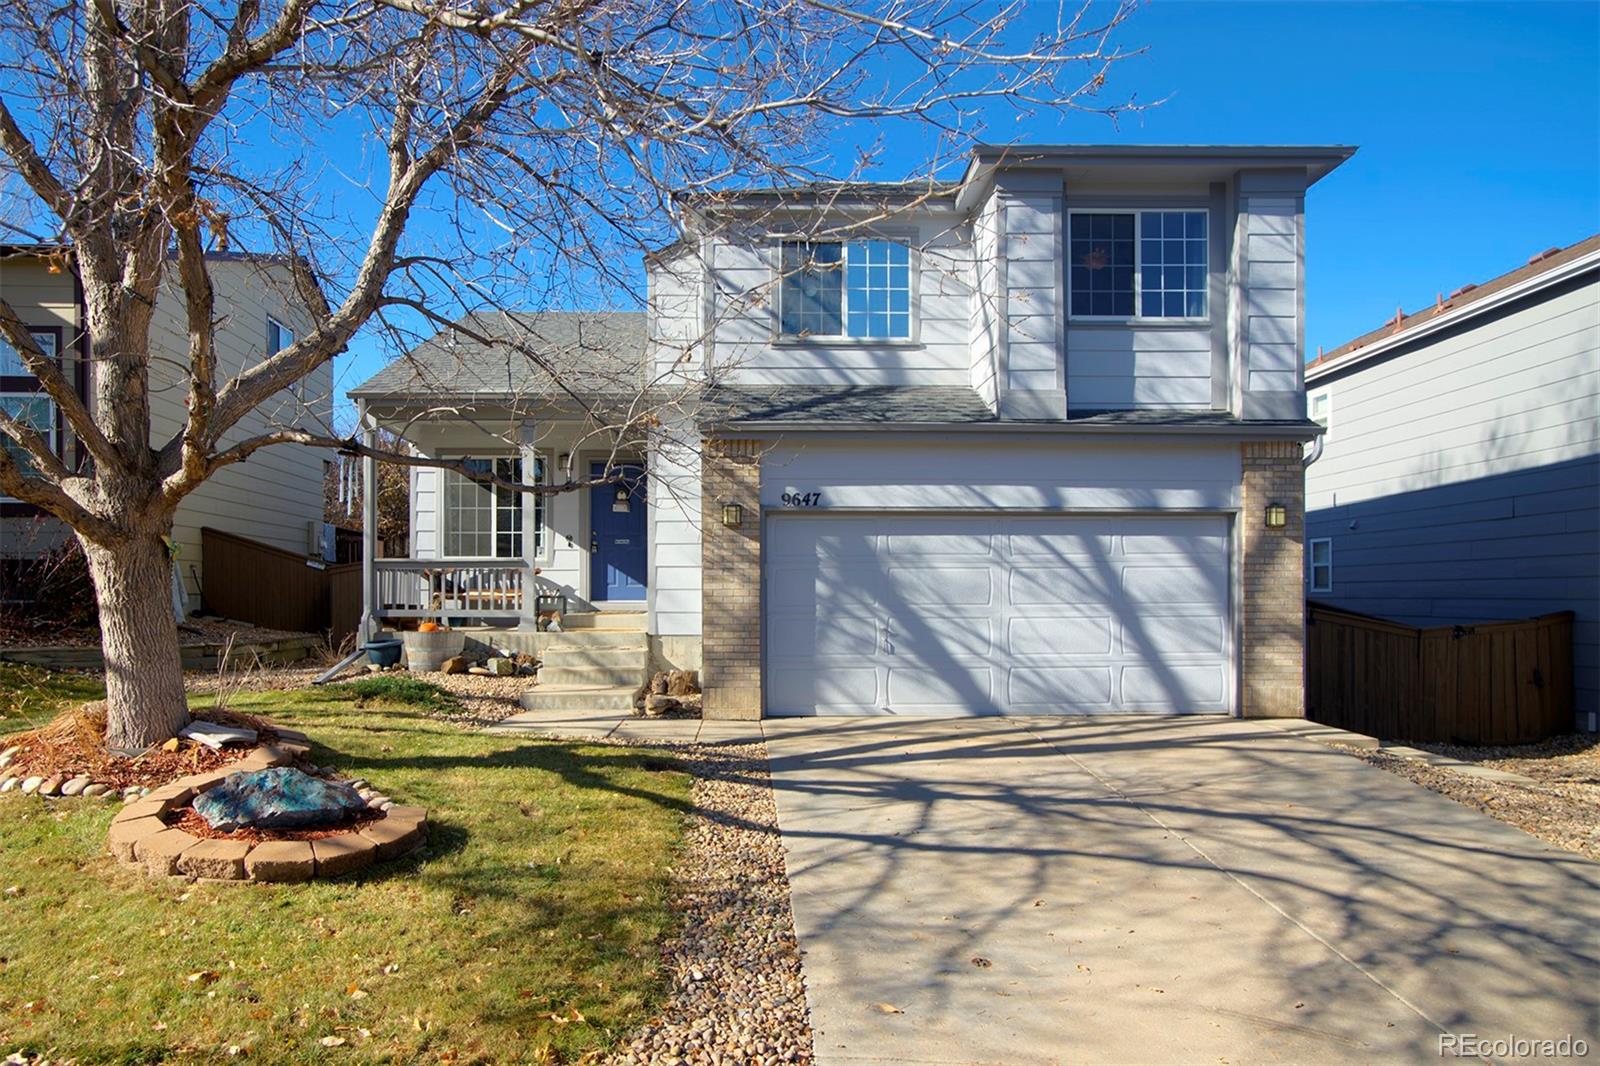 9647  cove creek drive, Highlands Ranch sold home. Closed on 2024-02-29 for $585,000.